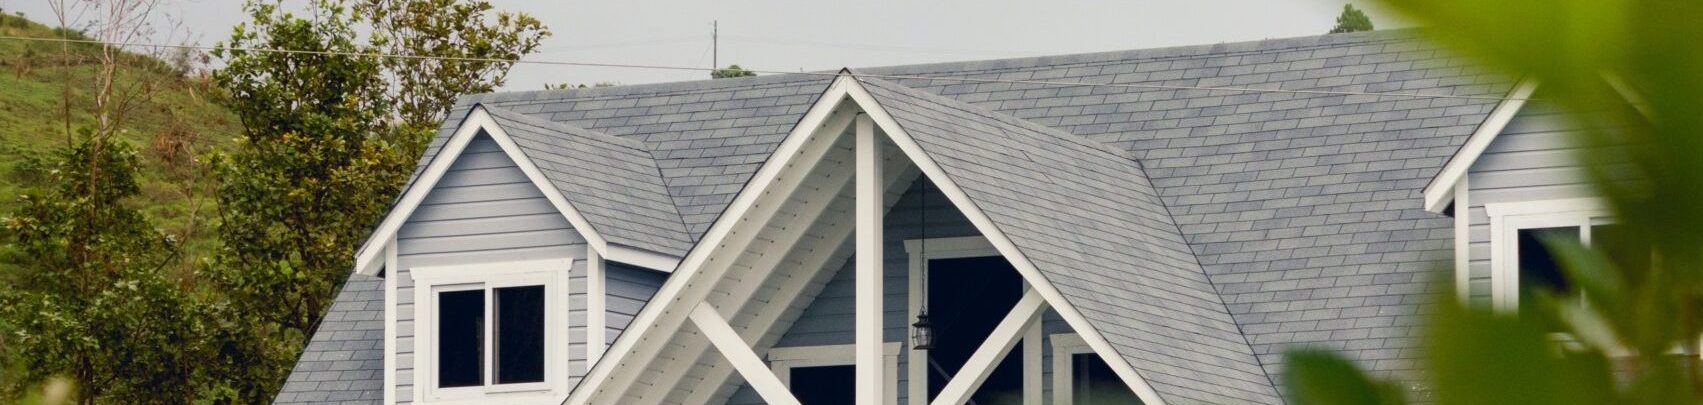 6 Steps to Getting Ready for a Roof Replacement